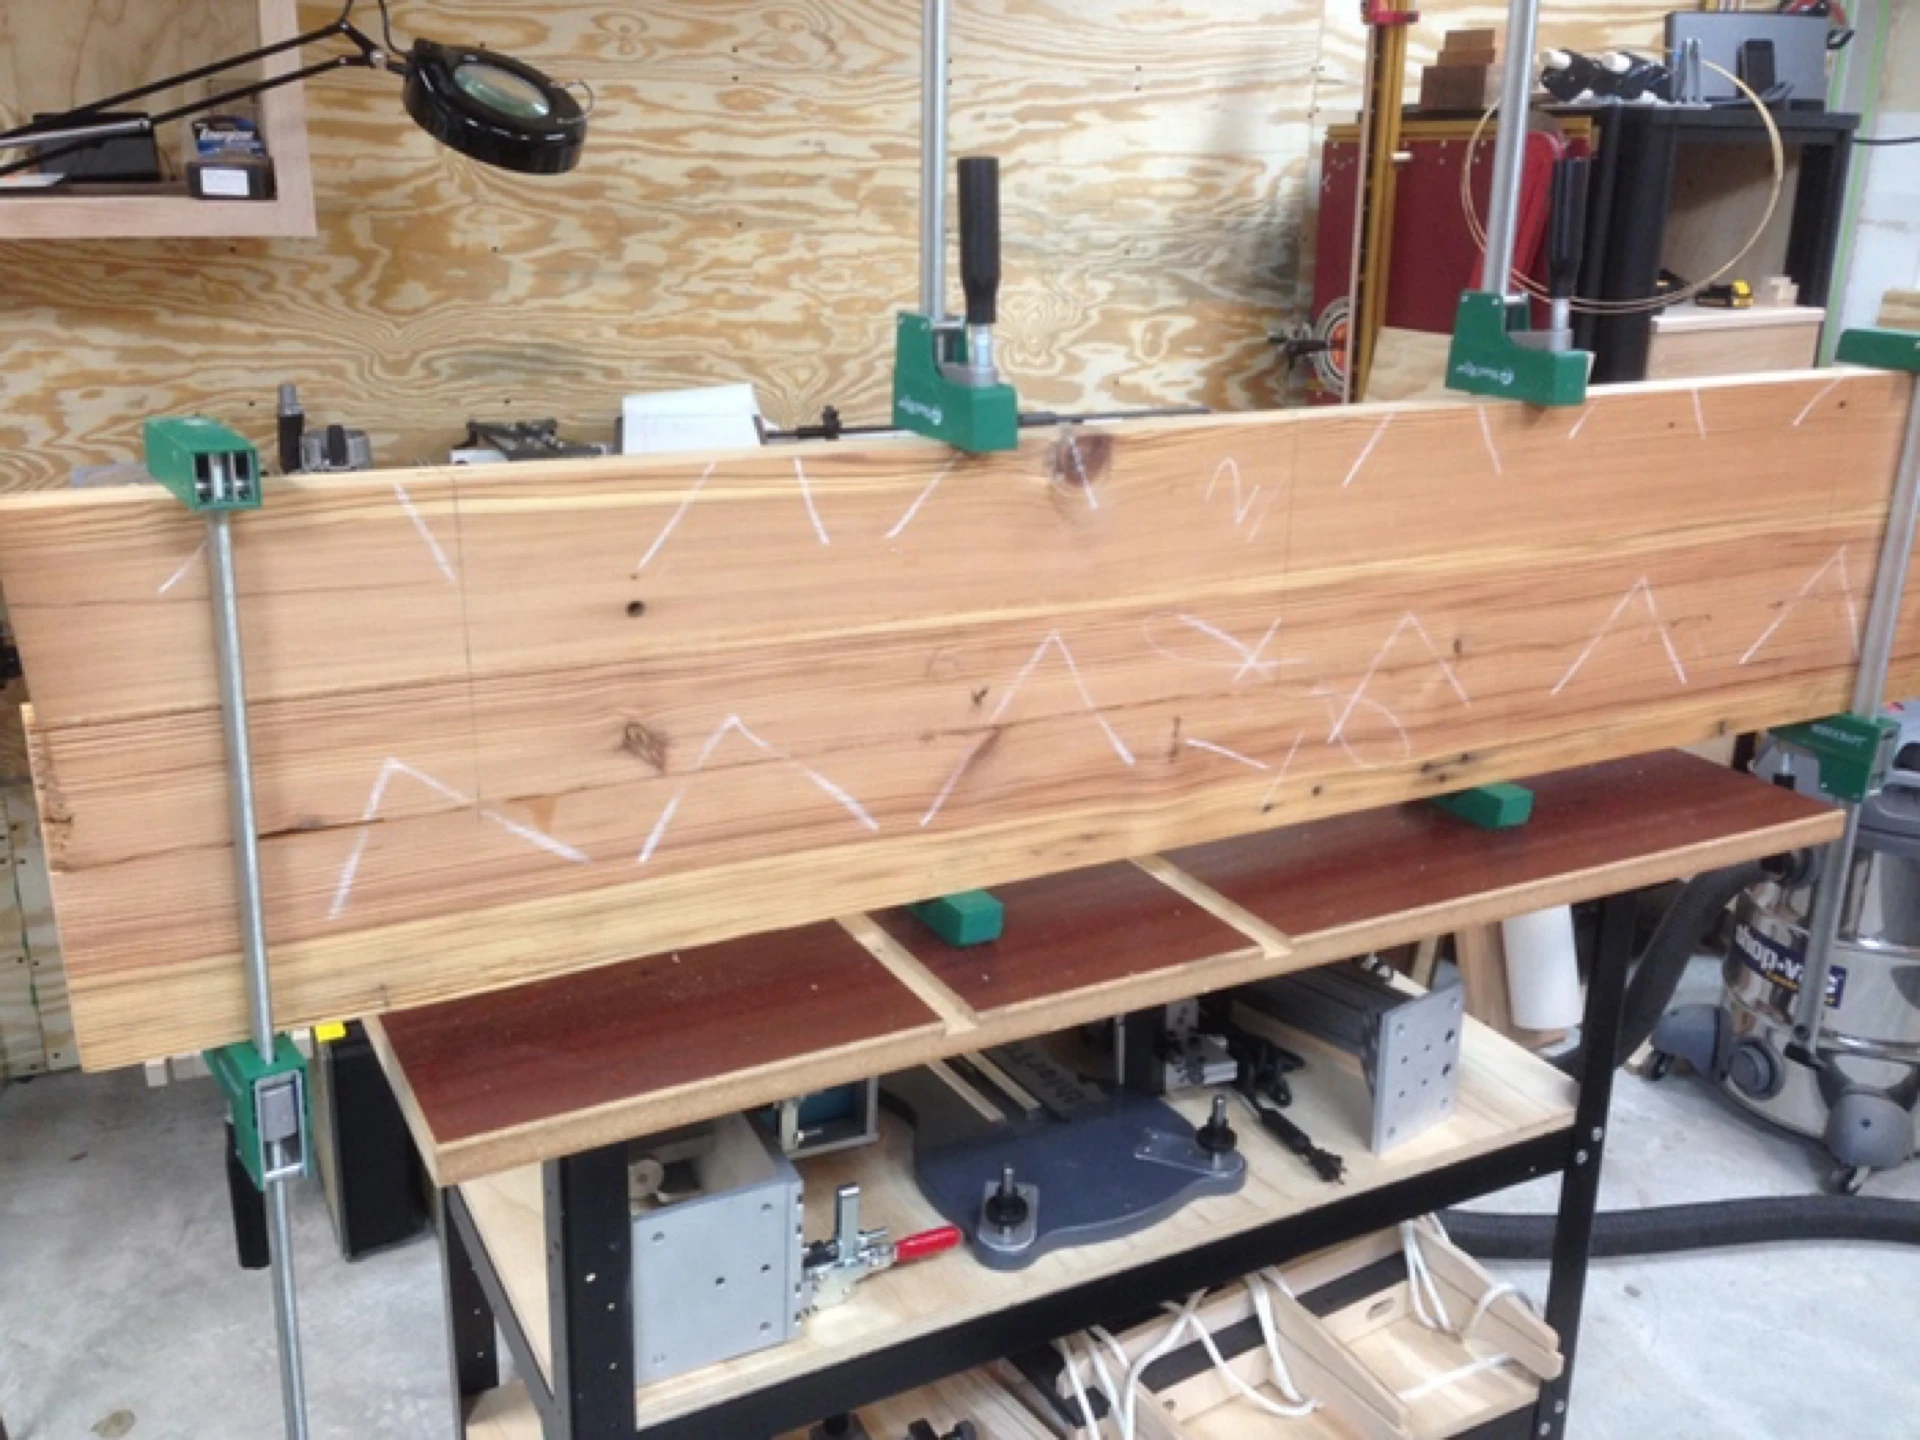 Glue-up and Clamping